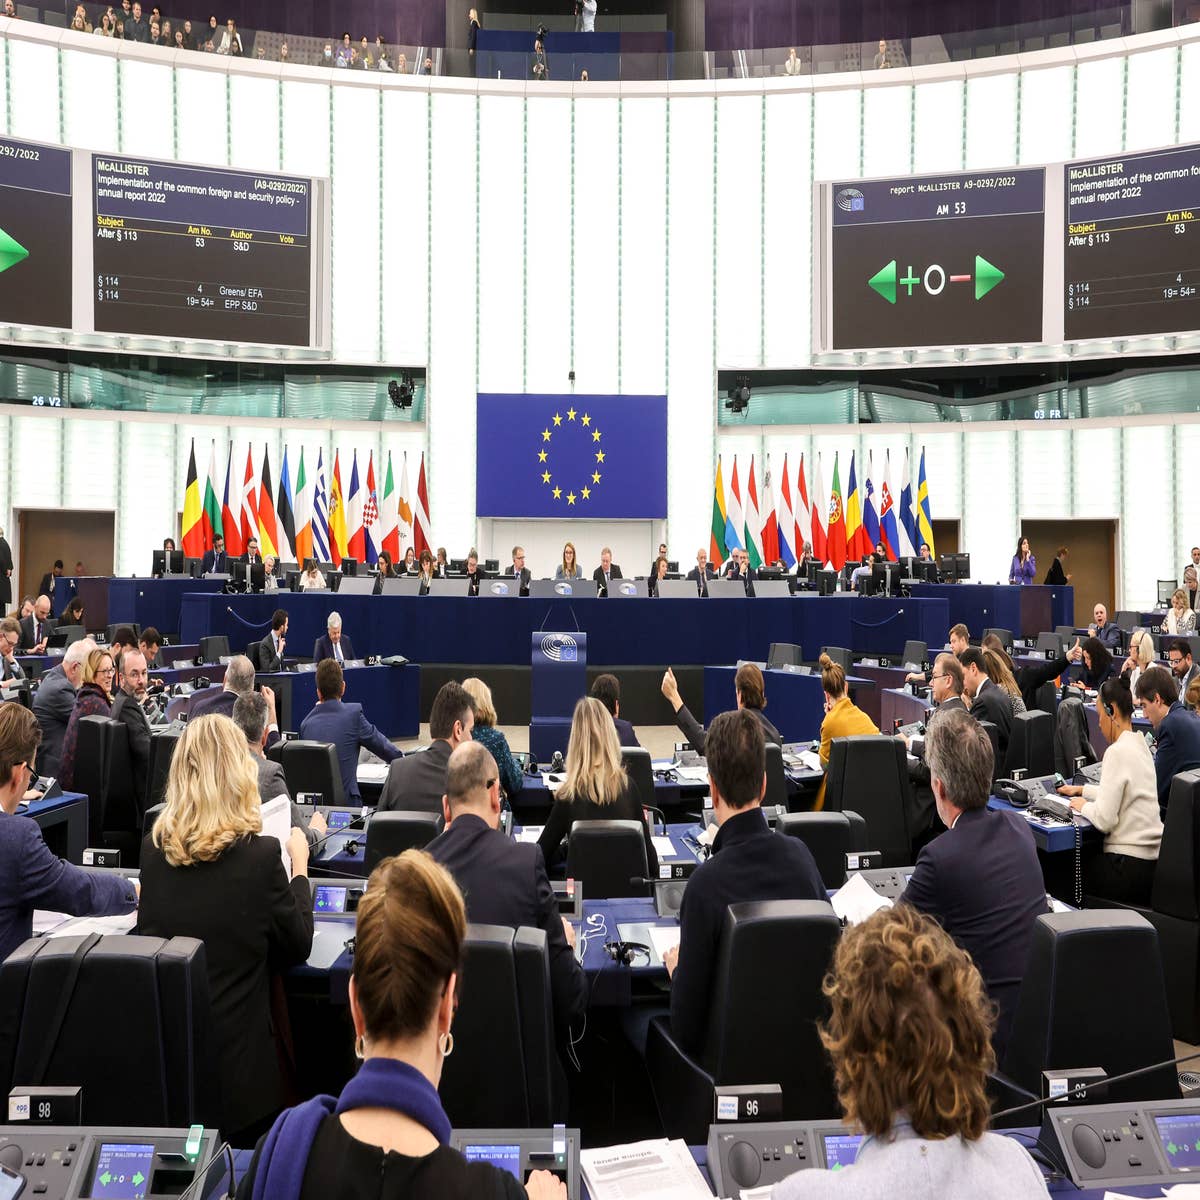 European Parliament votes to take action against loot boxes, gaming  addiction, gold farming and more